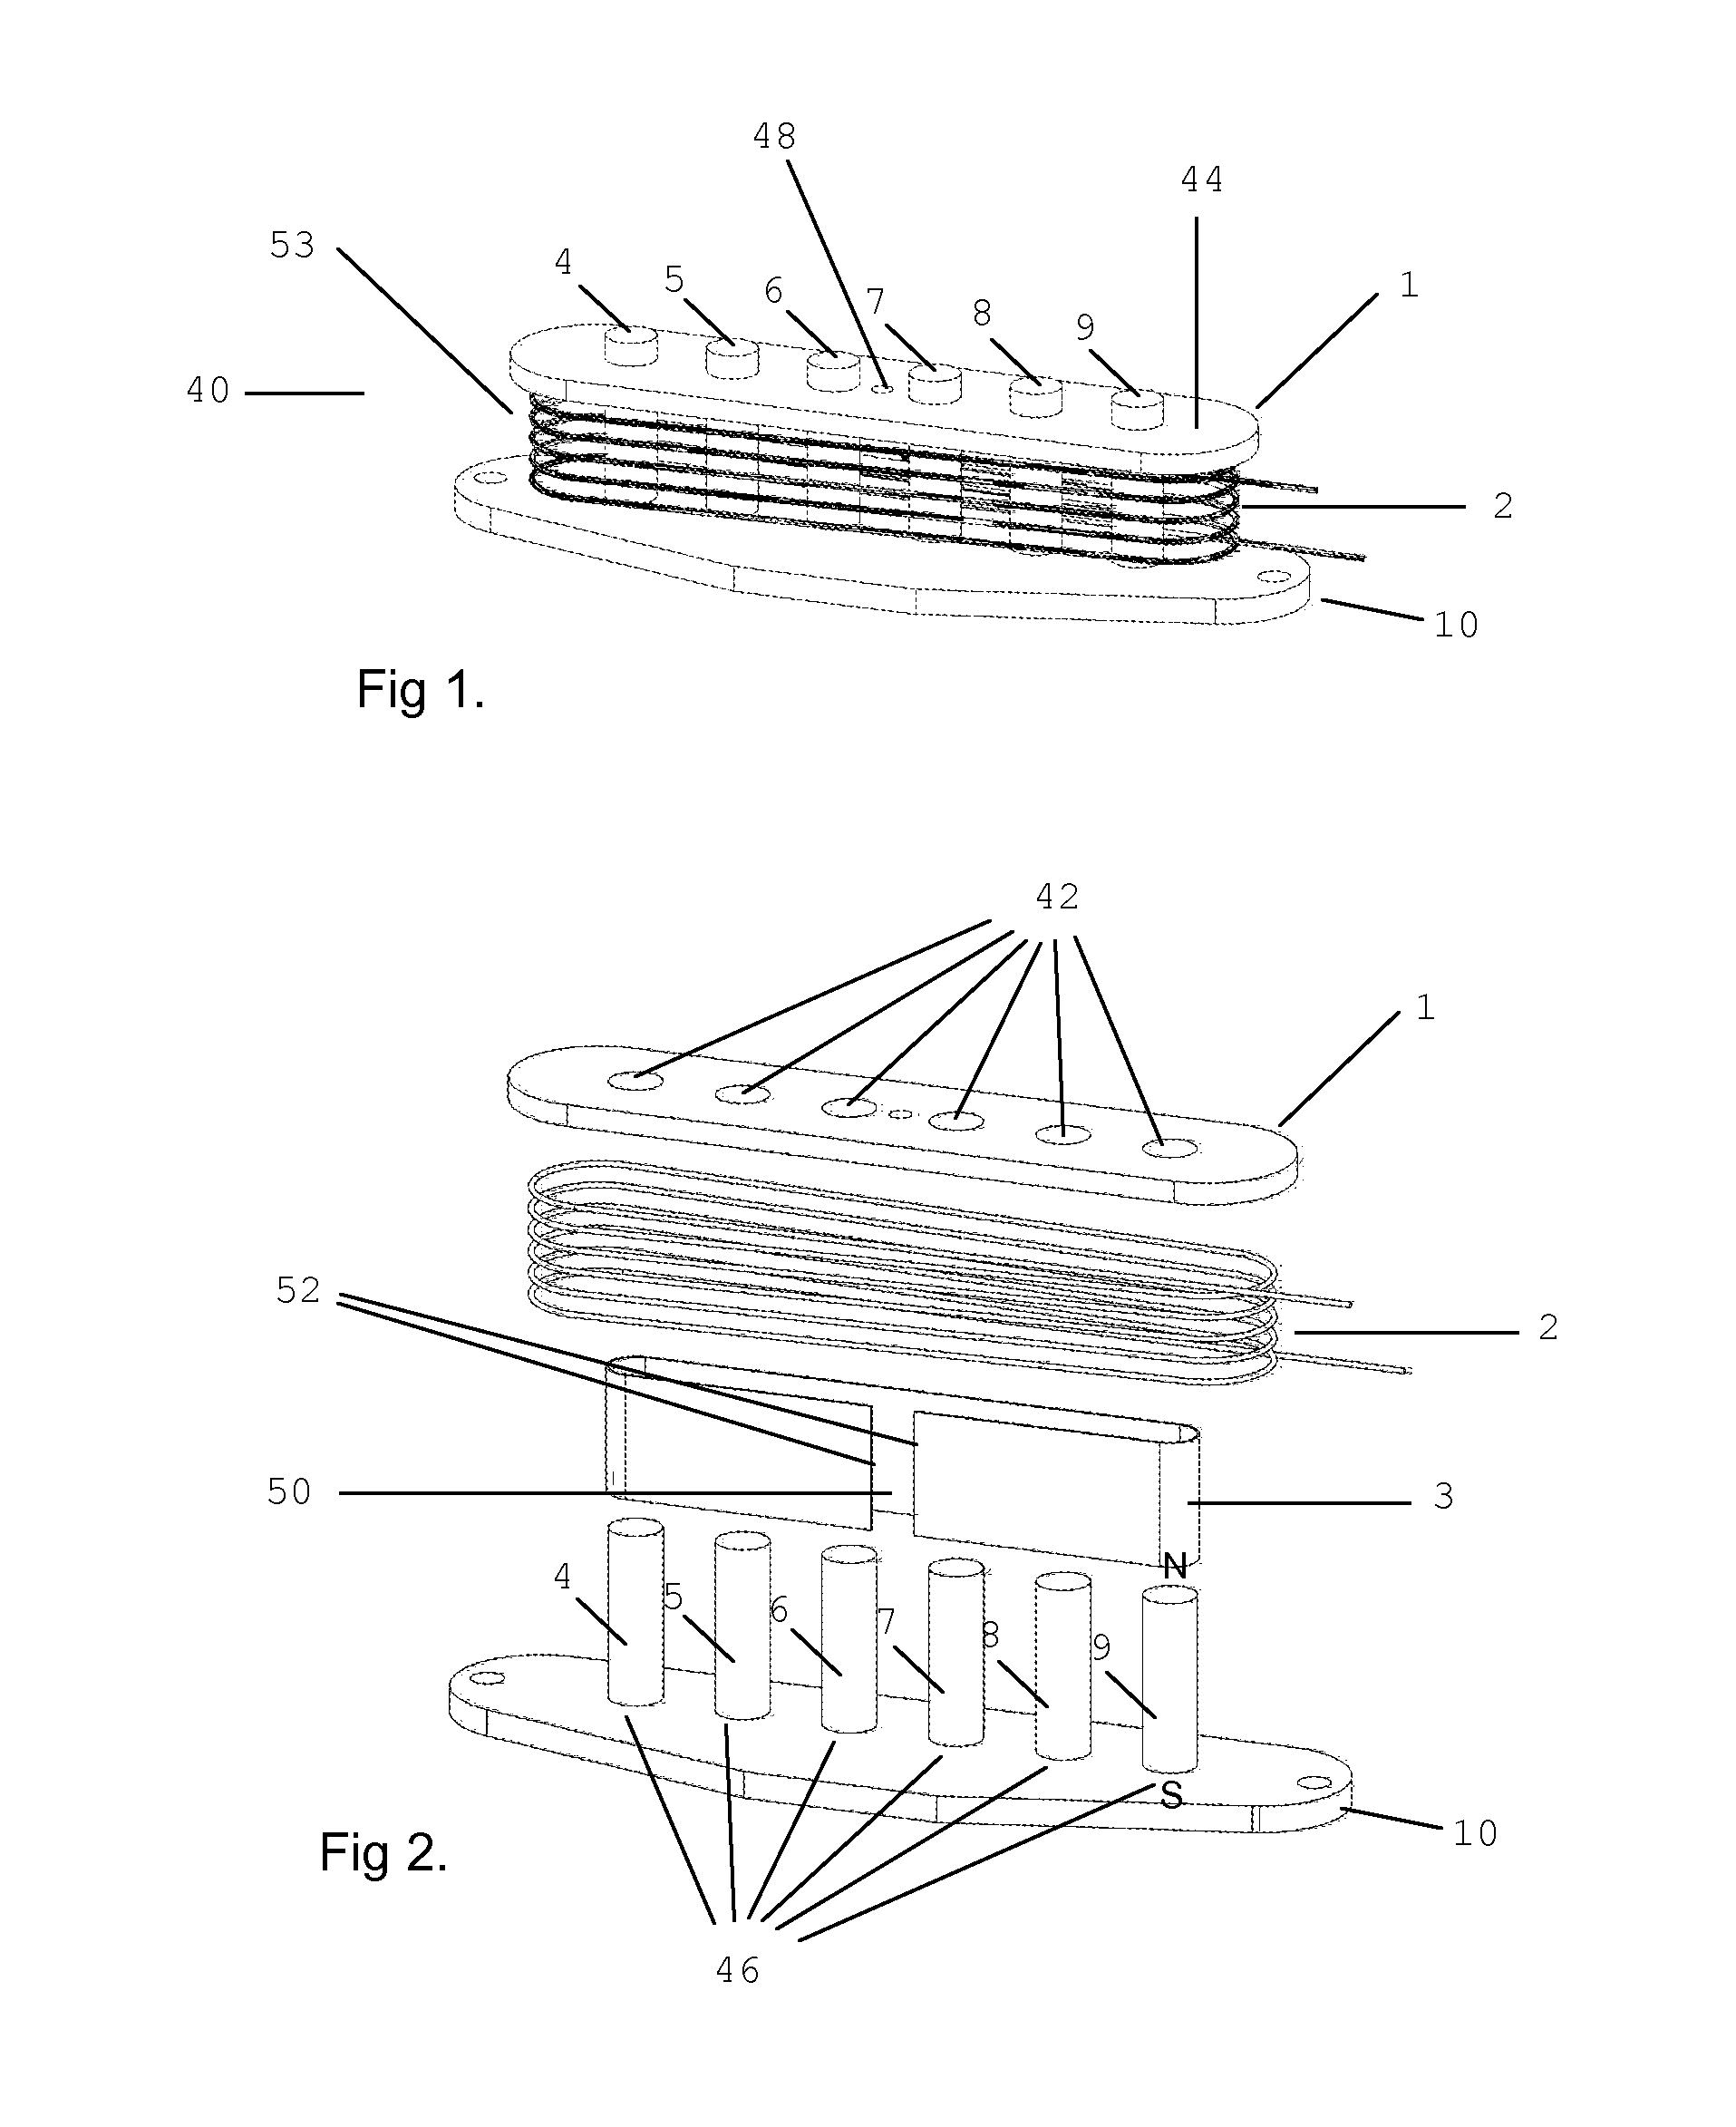 Magnetic flux concentrator for increasing the efficiency of an electromagnetic pickup